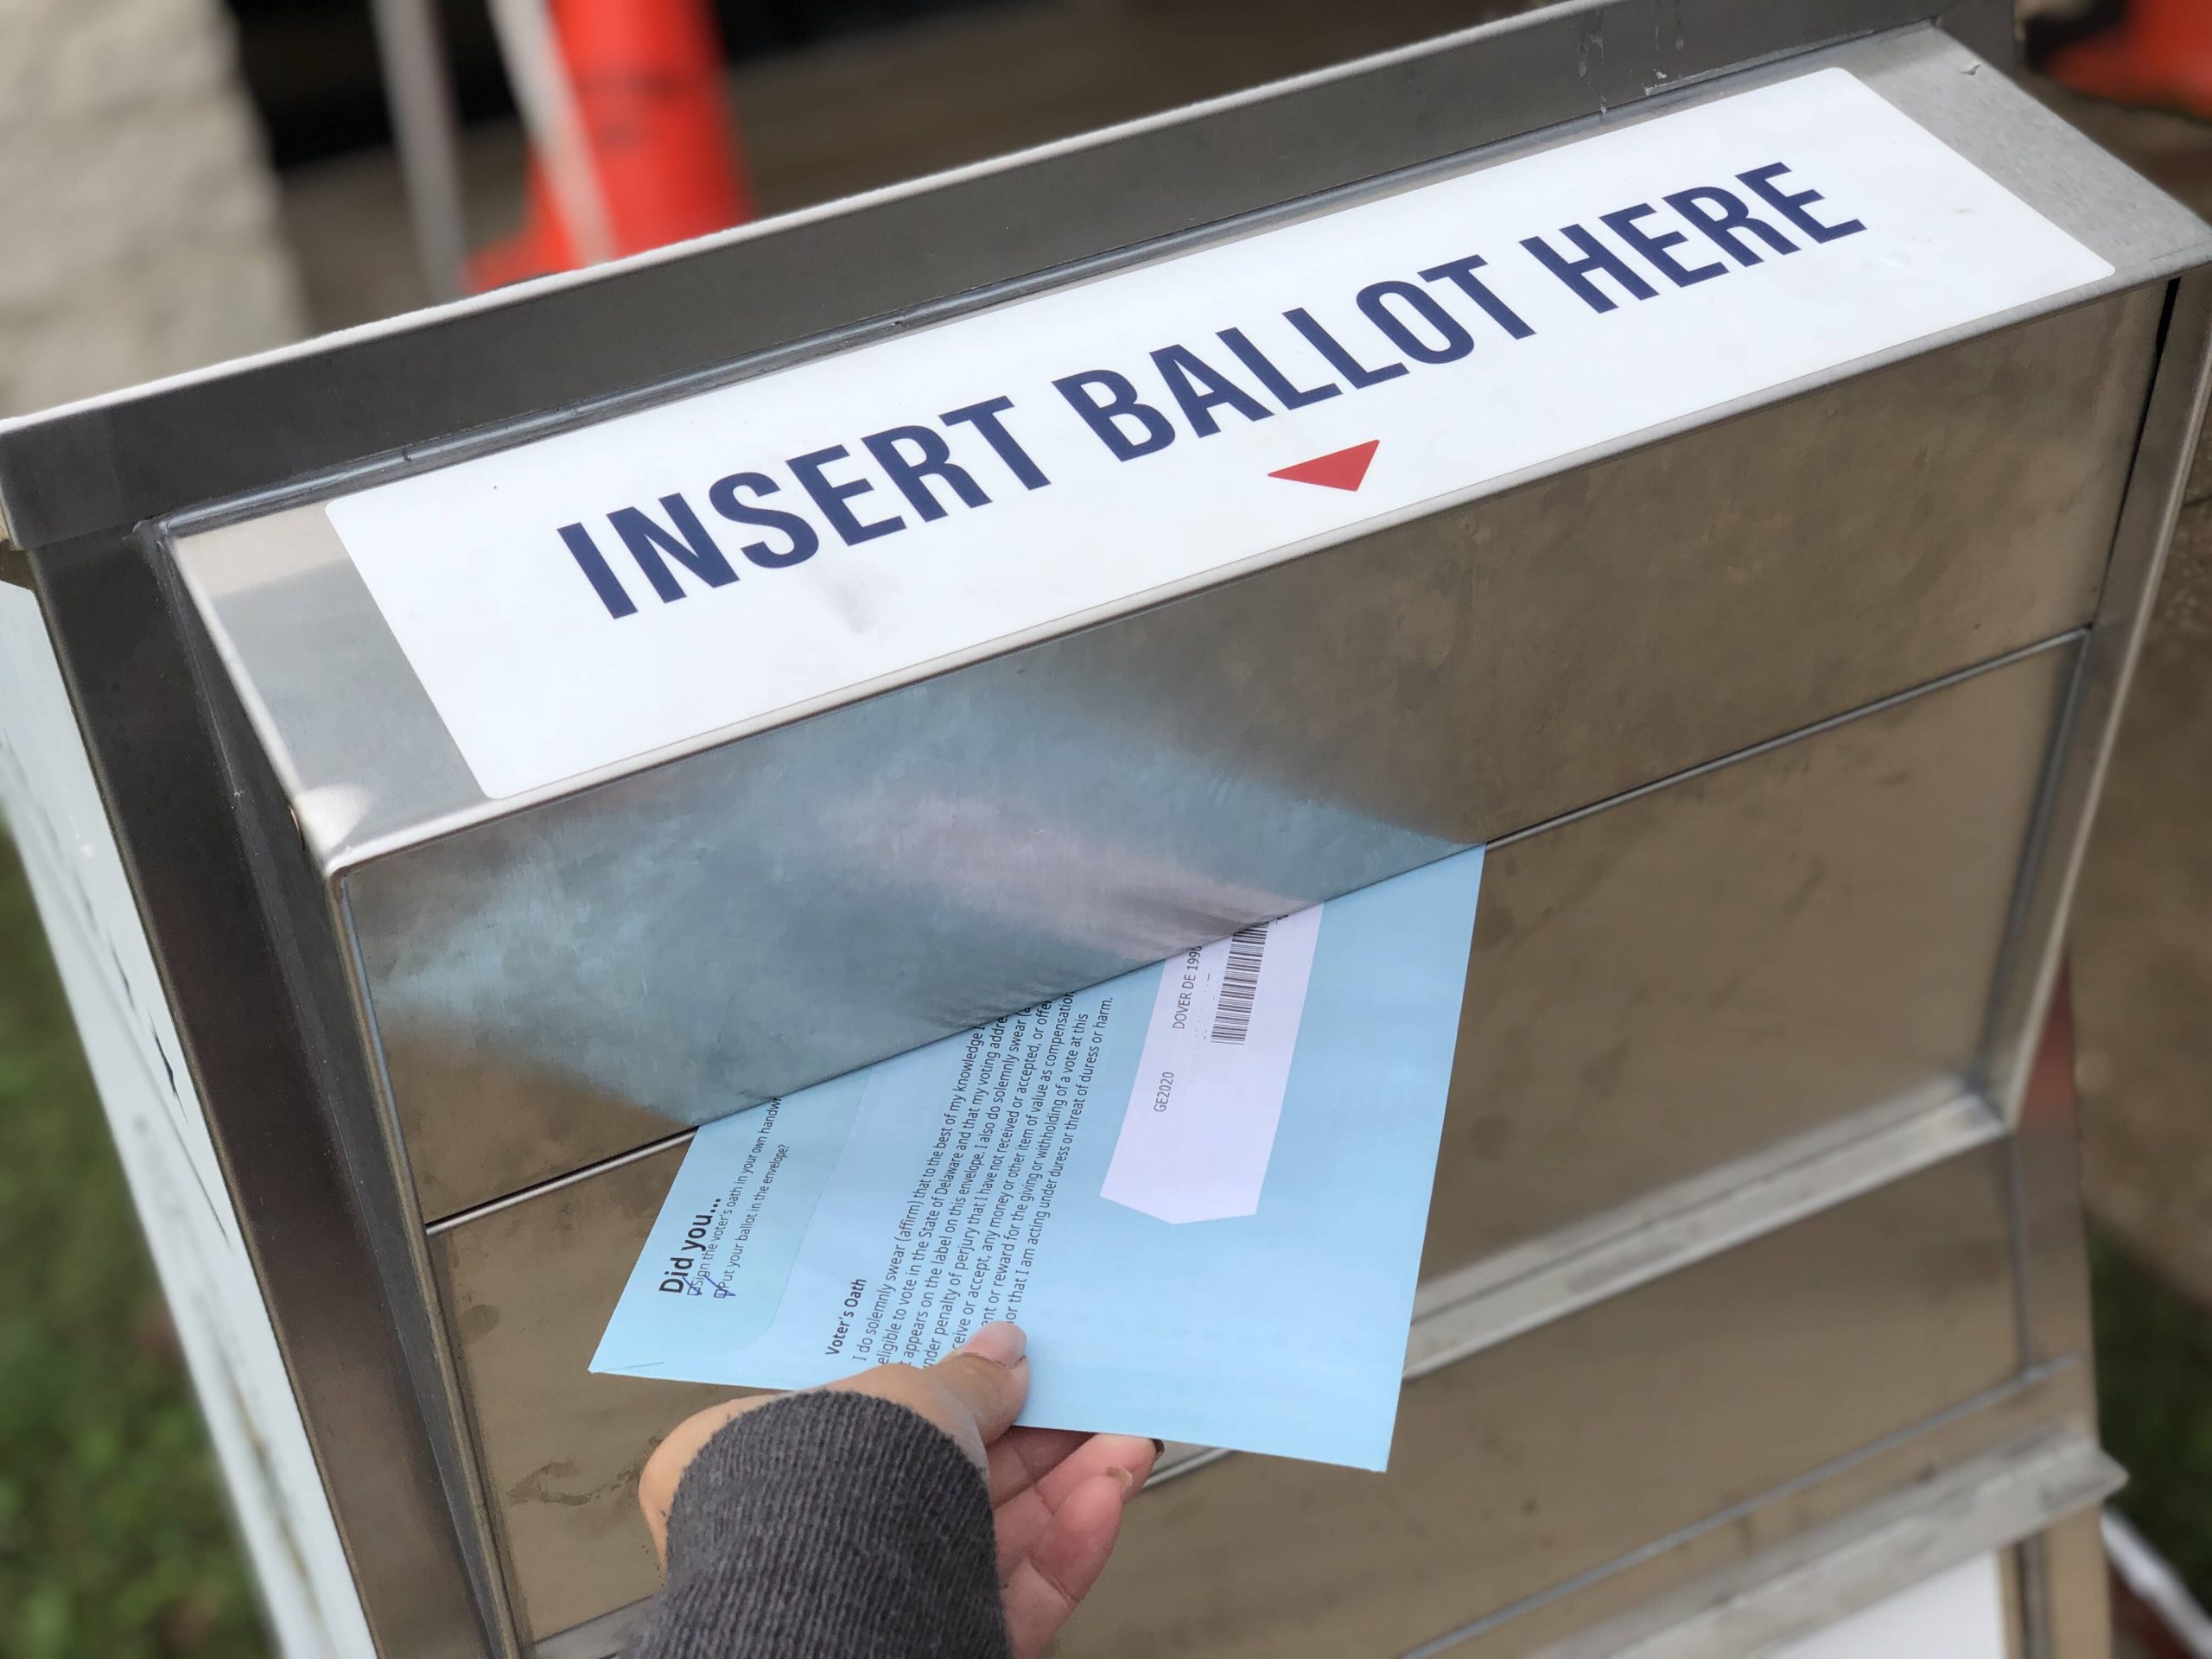 Drop your voted ballot in the ballot drop box.